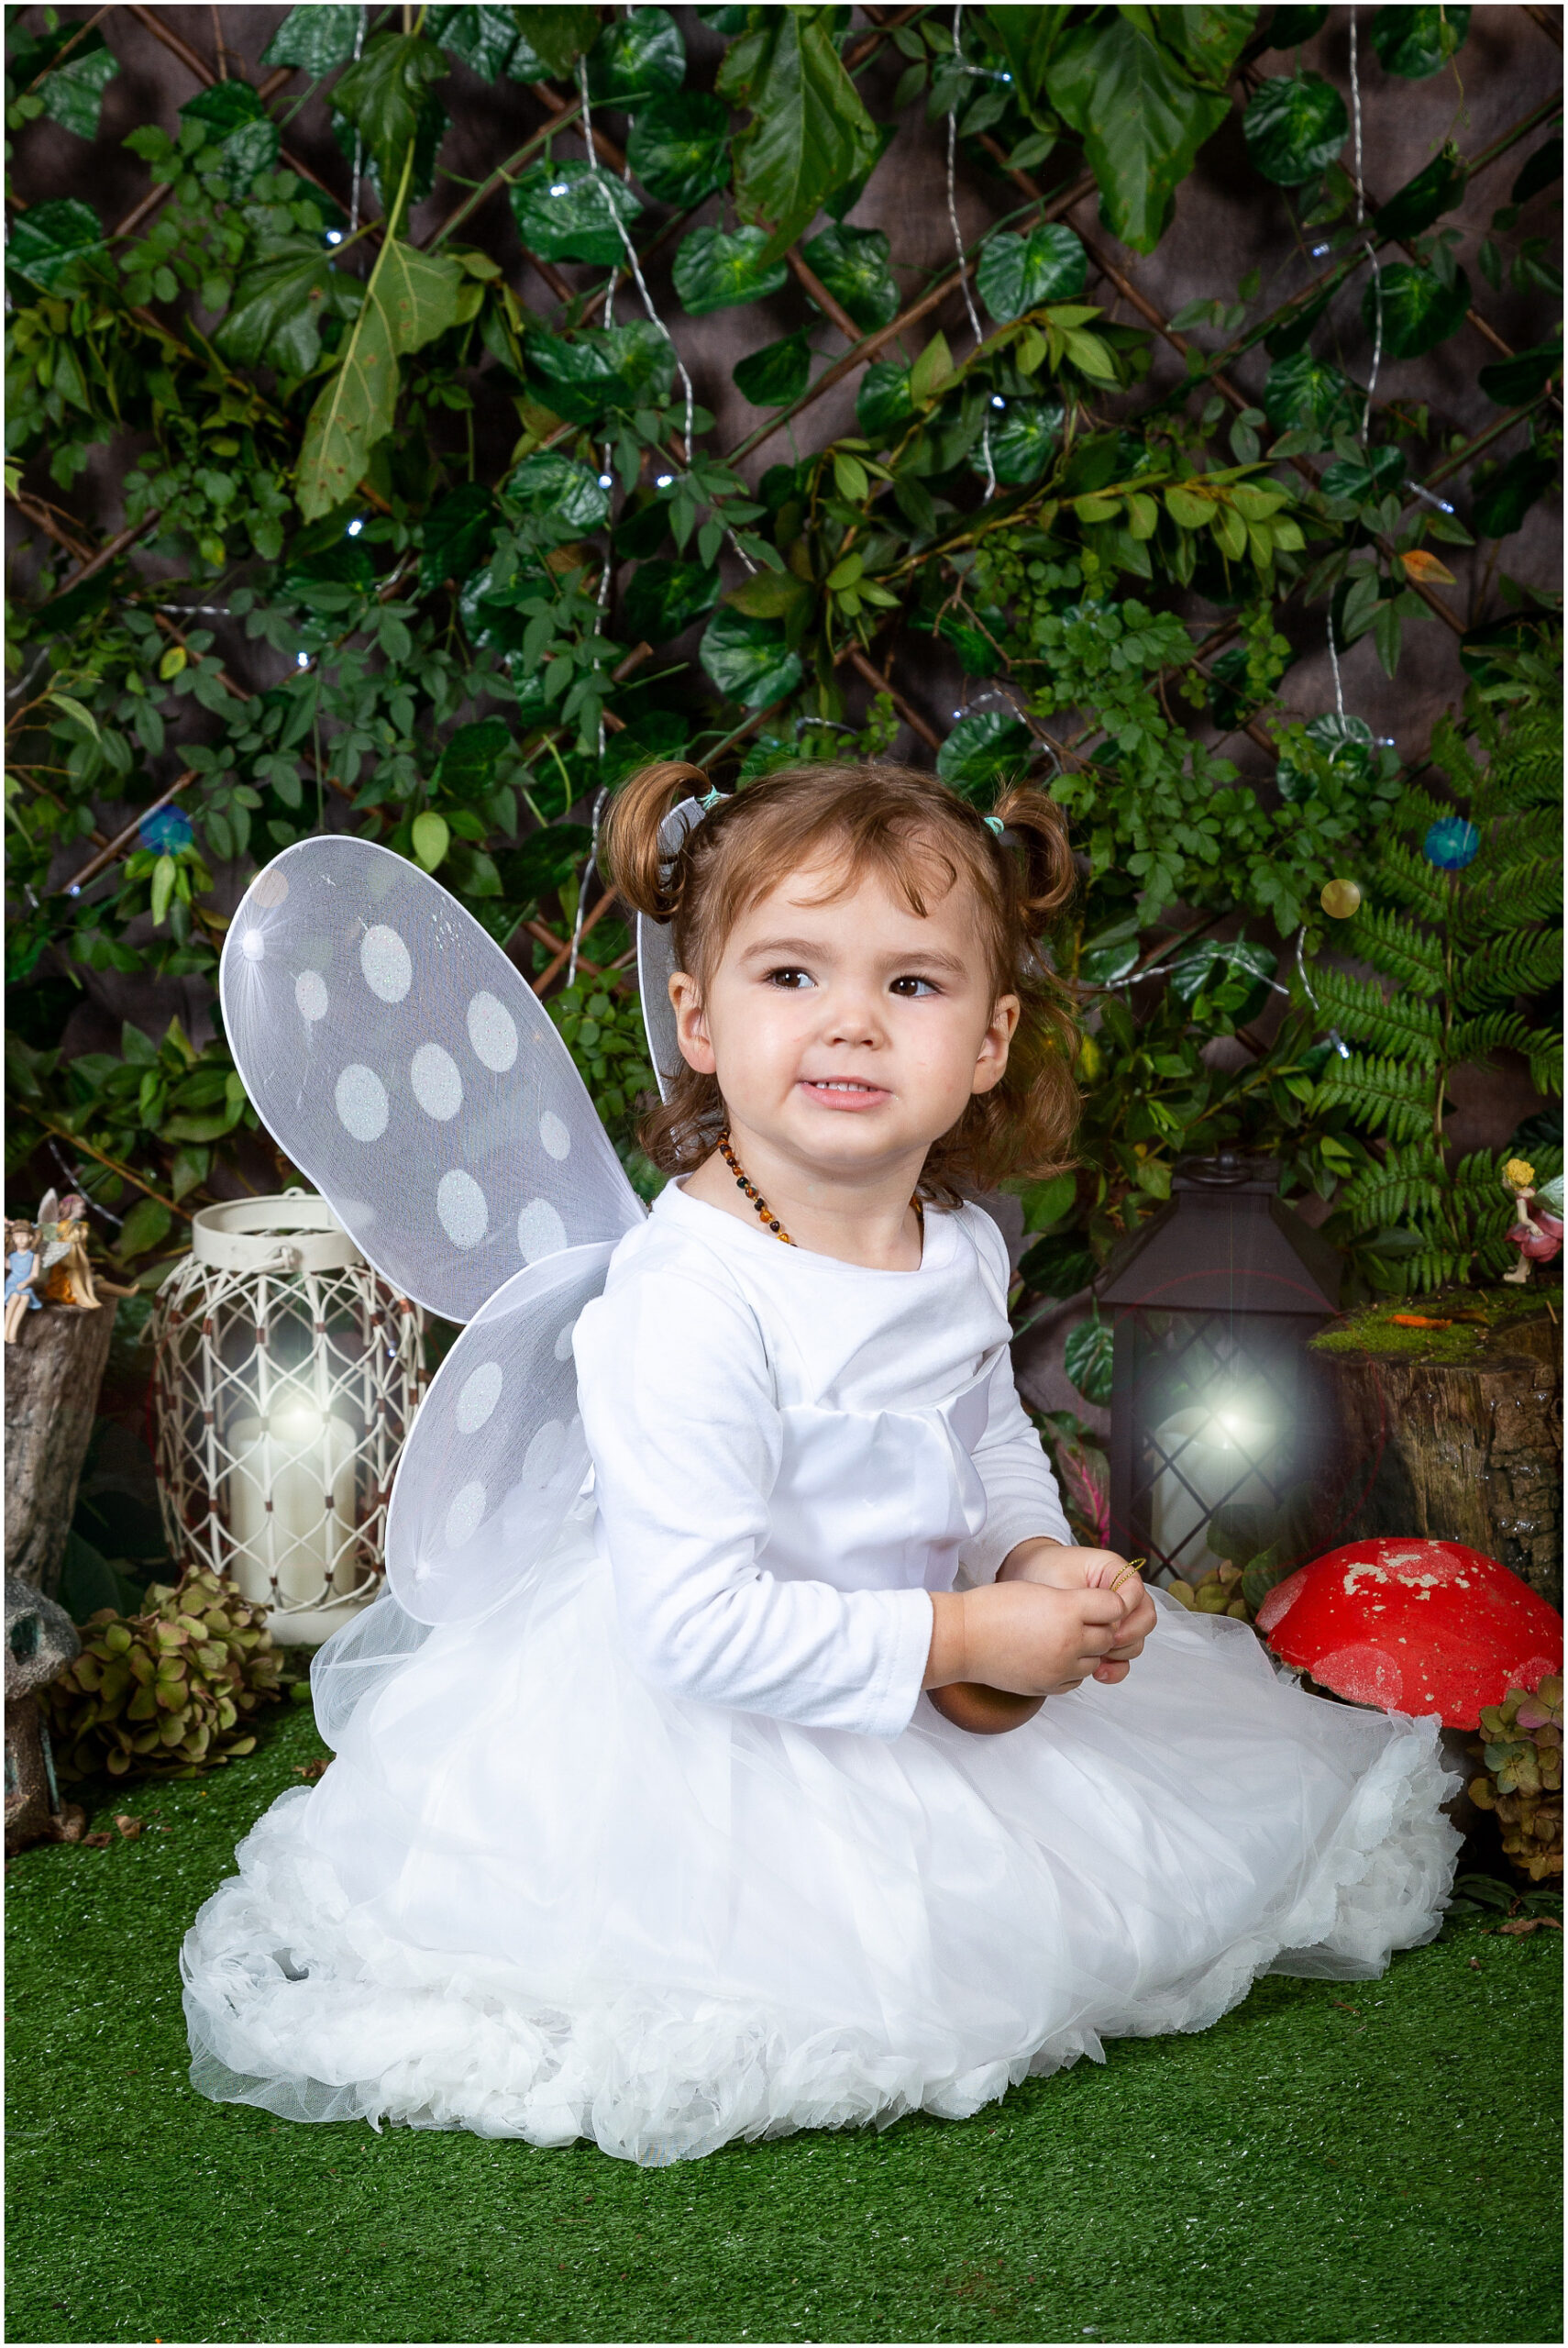 Miané, the 2 year old fairy…